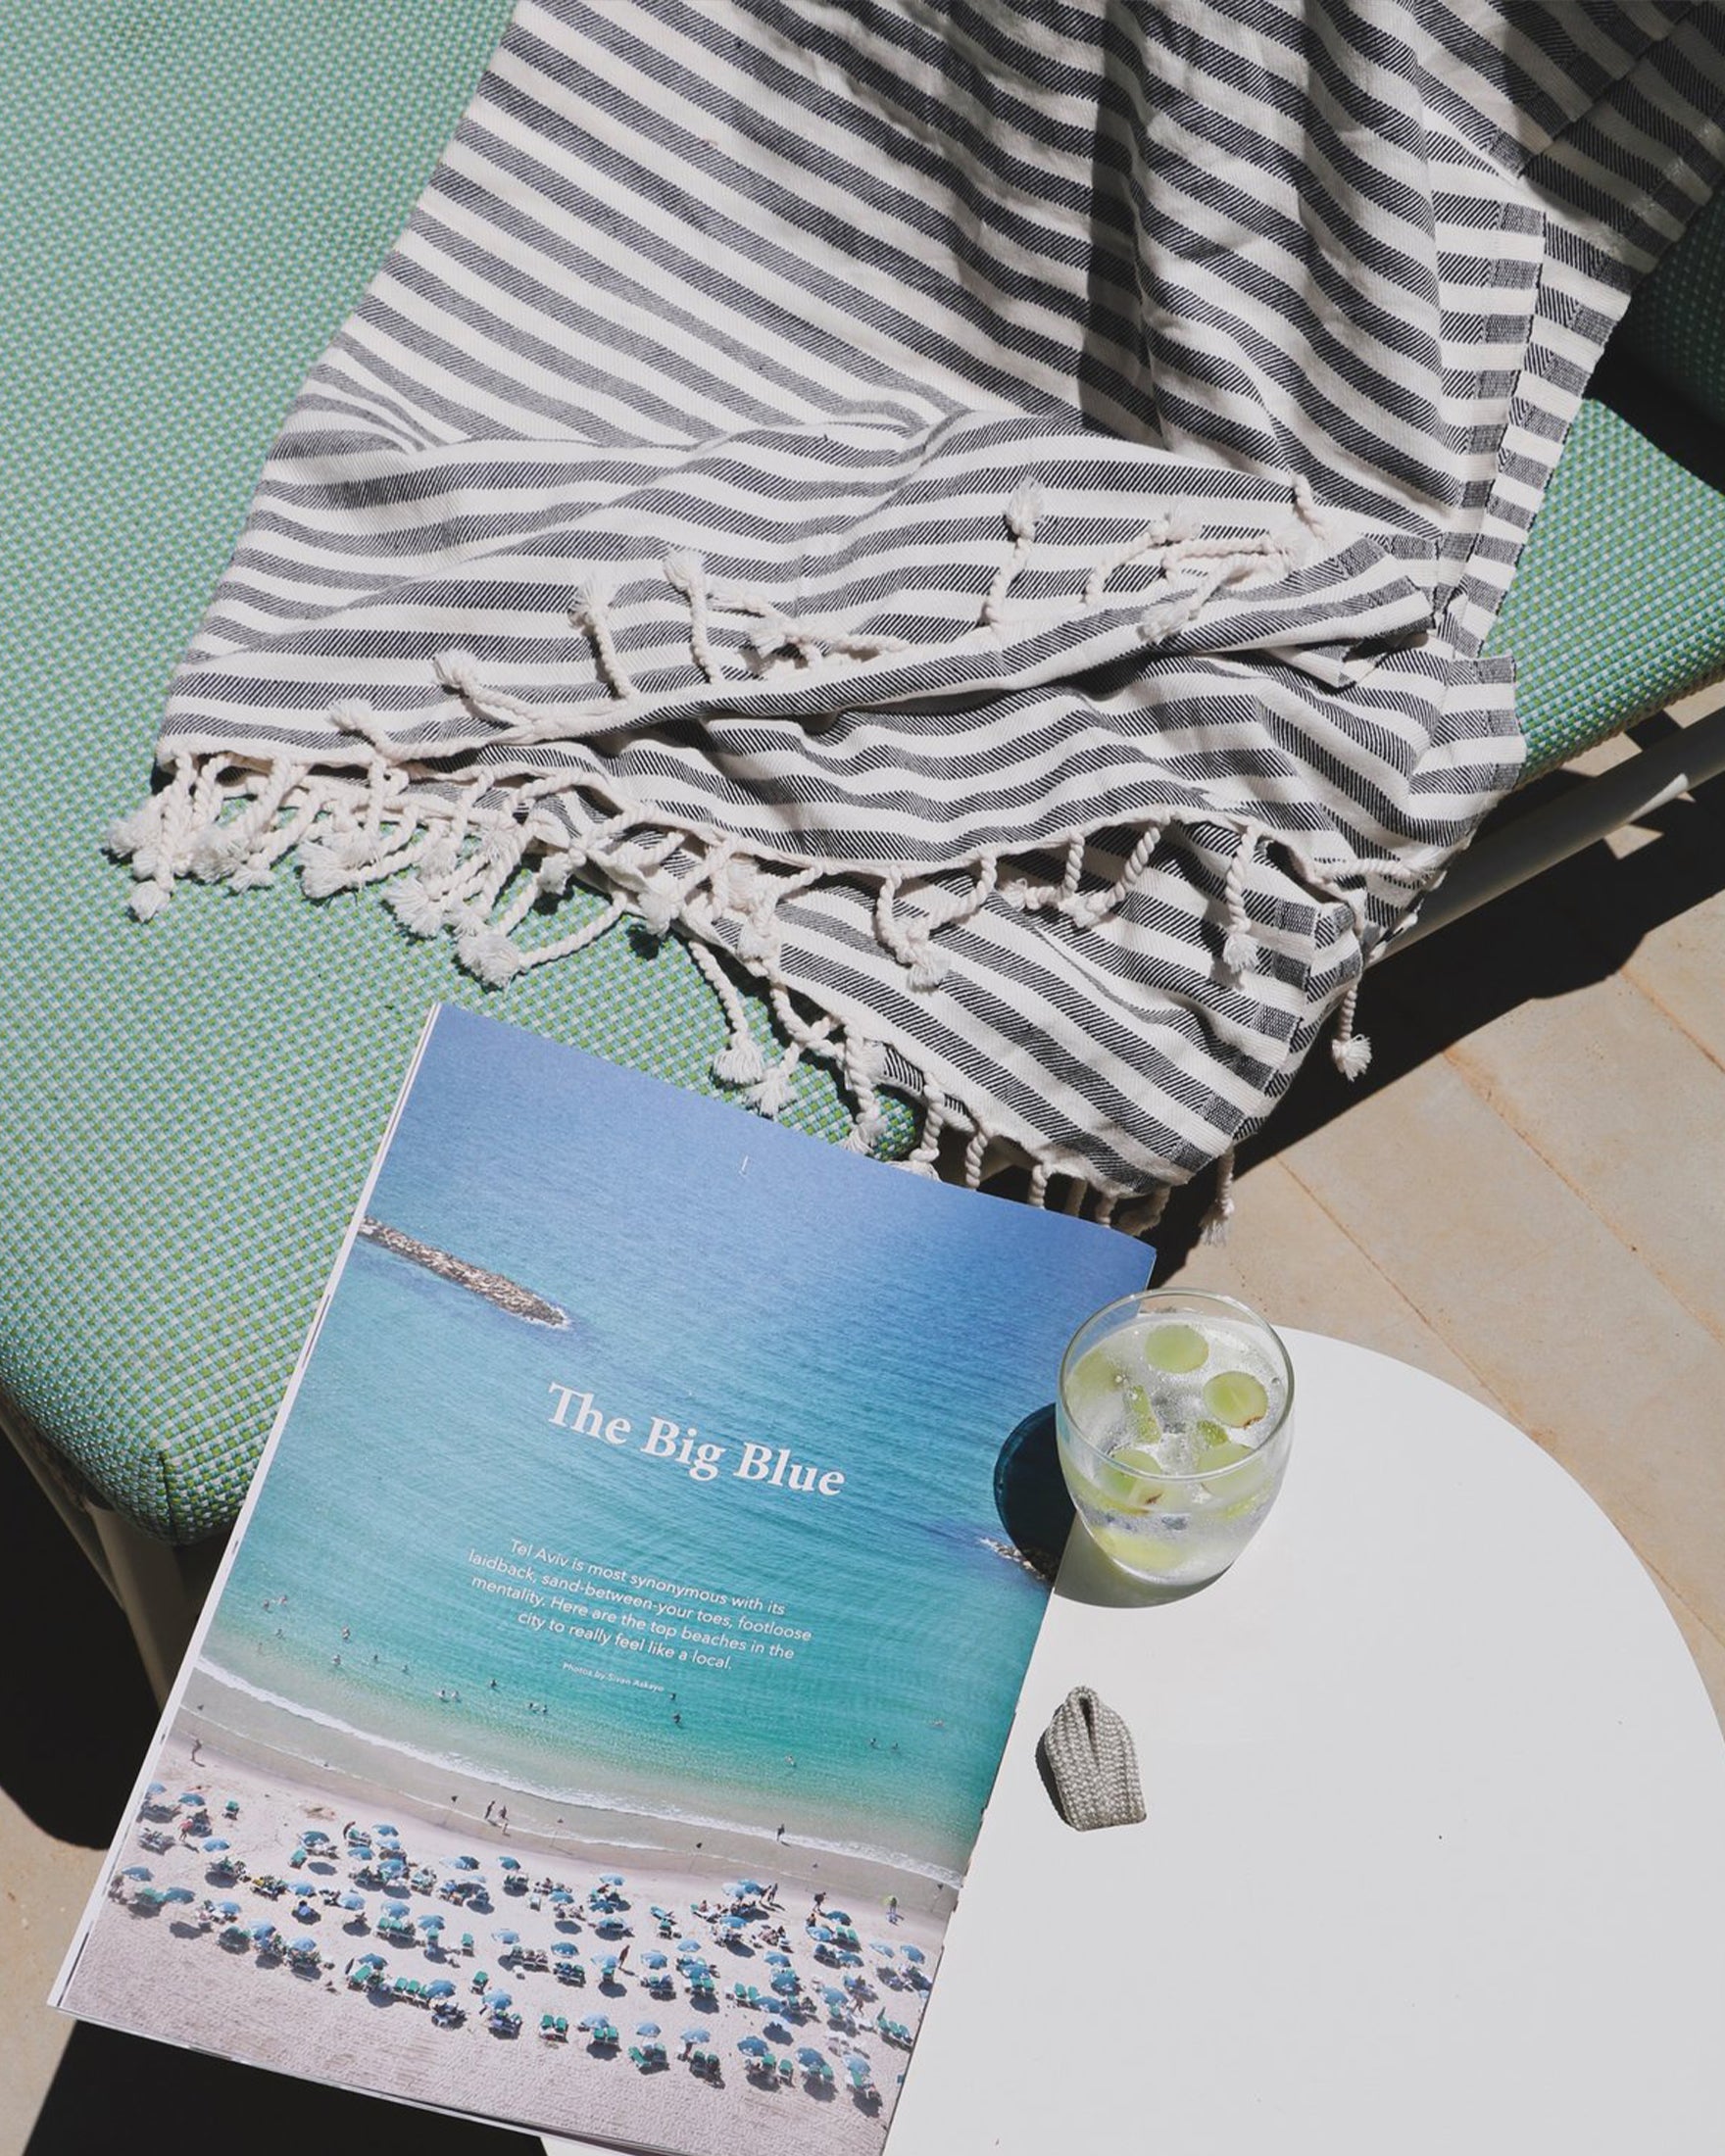  Saint-Tropez • Sand Free Beach Towel by Sunkissed Sunkissed Perfumarie